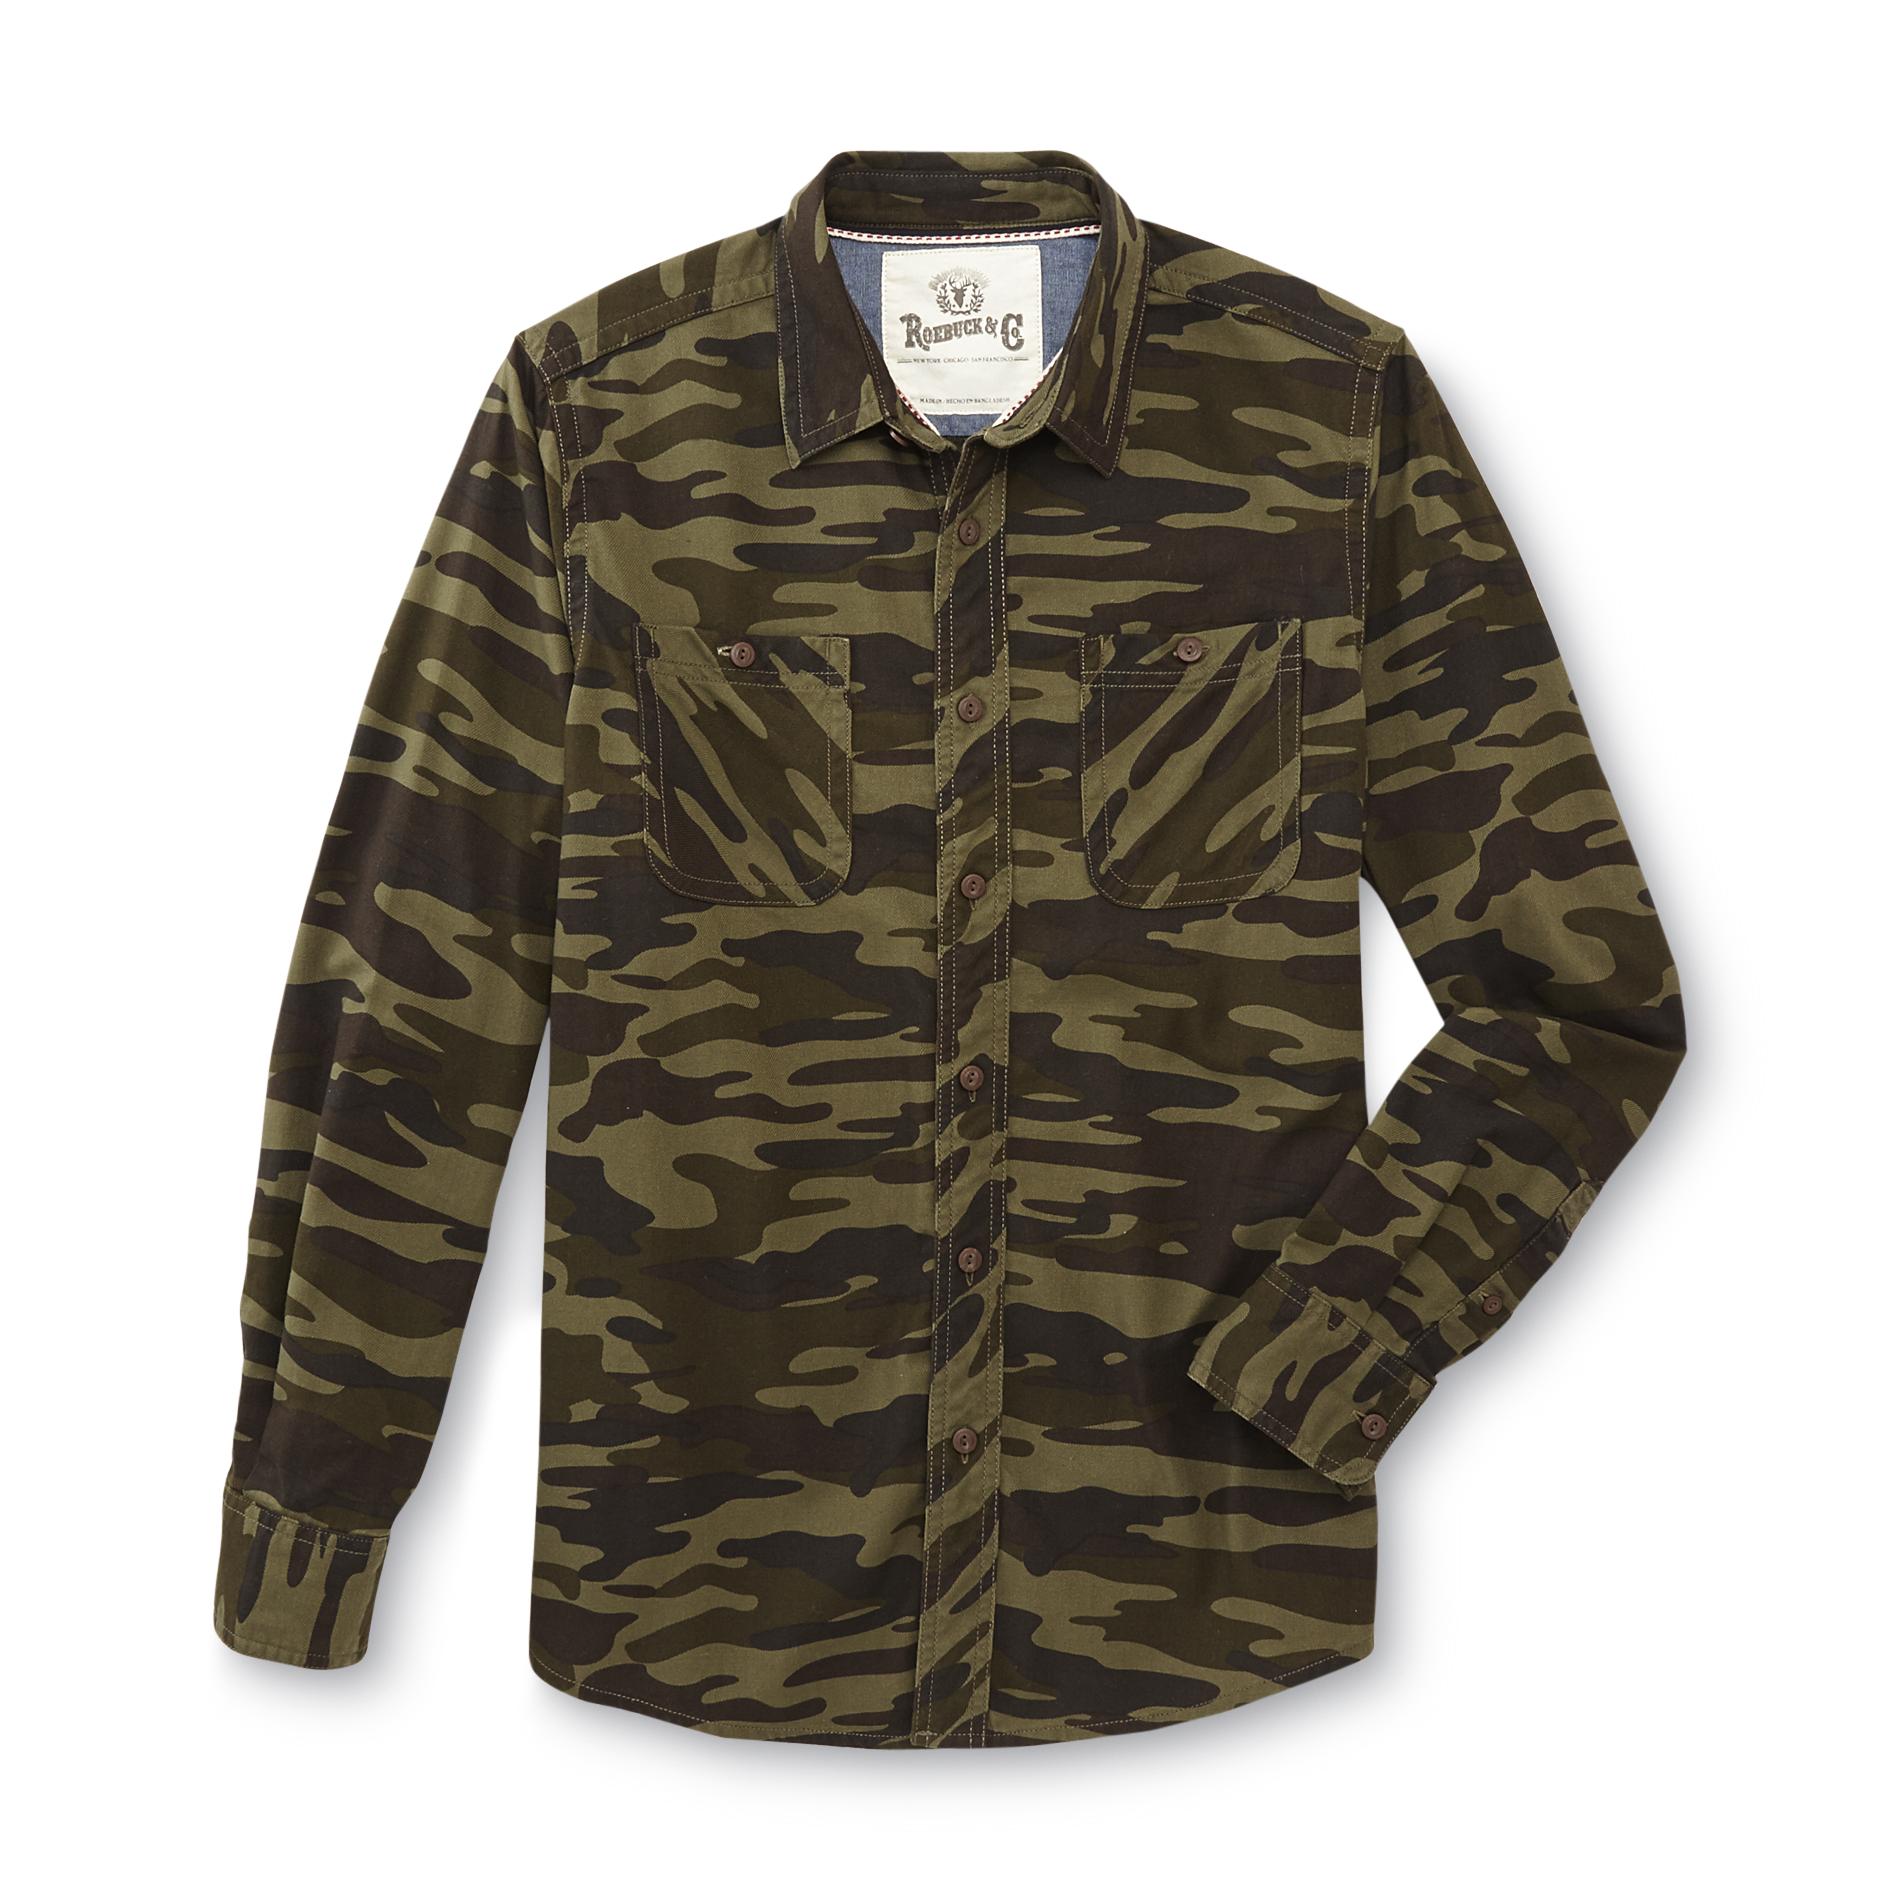 Roebuck & Co. Young Men's Twill Button-Front Shirt - Camouflage